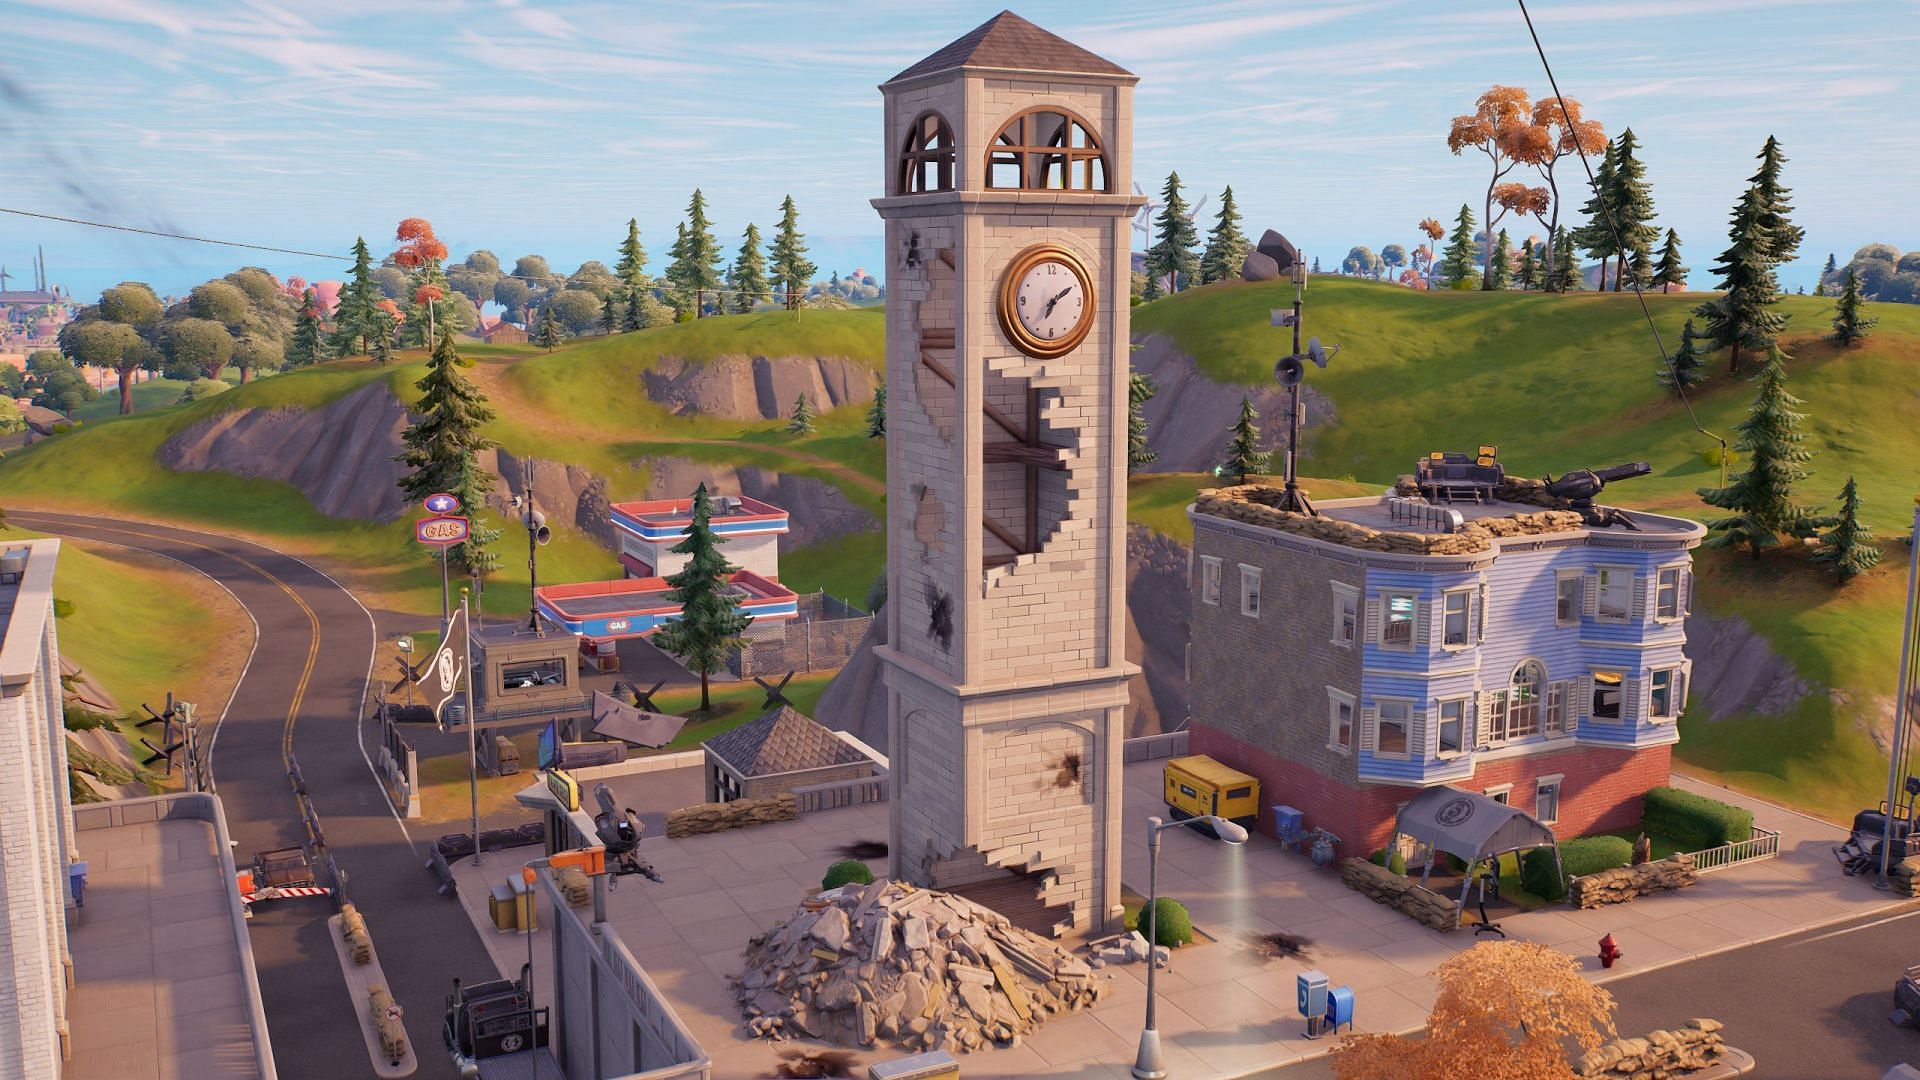 Tilted Towers 1920X1080 Wallpapers